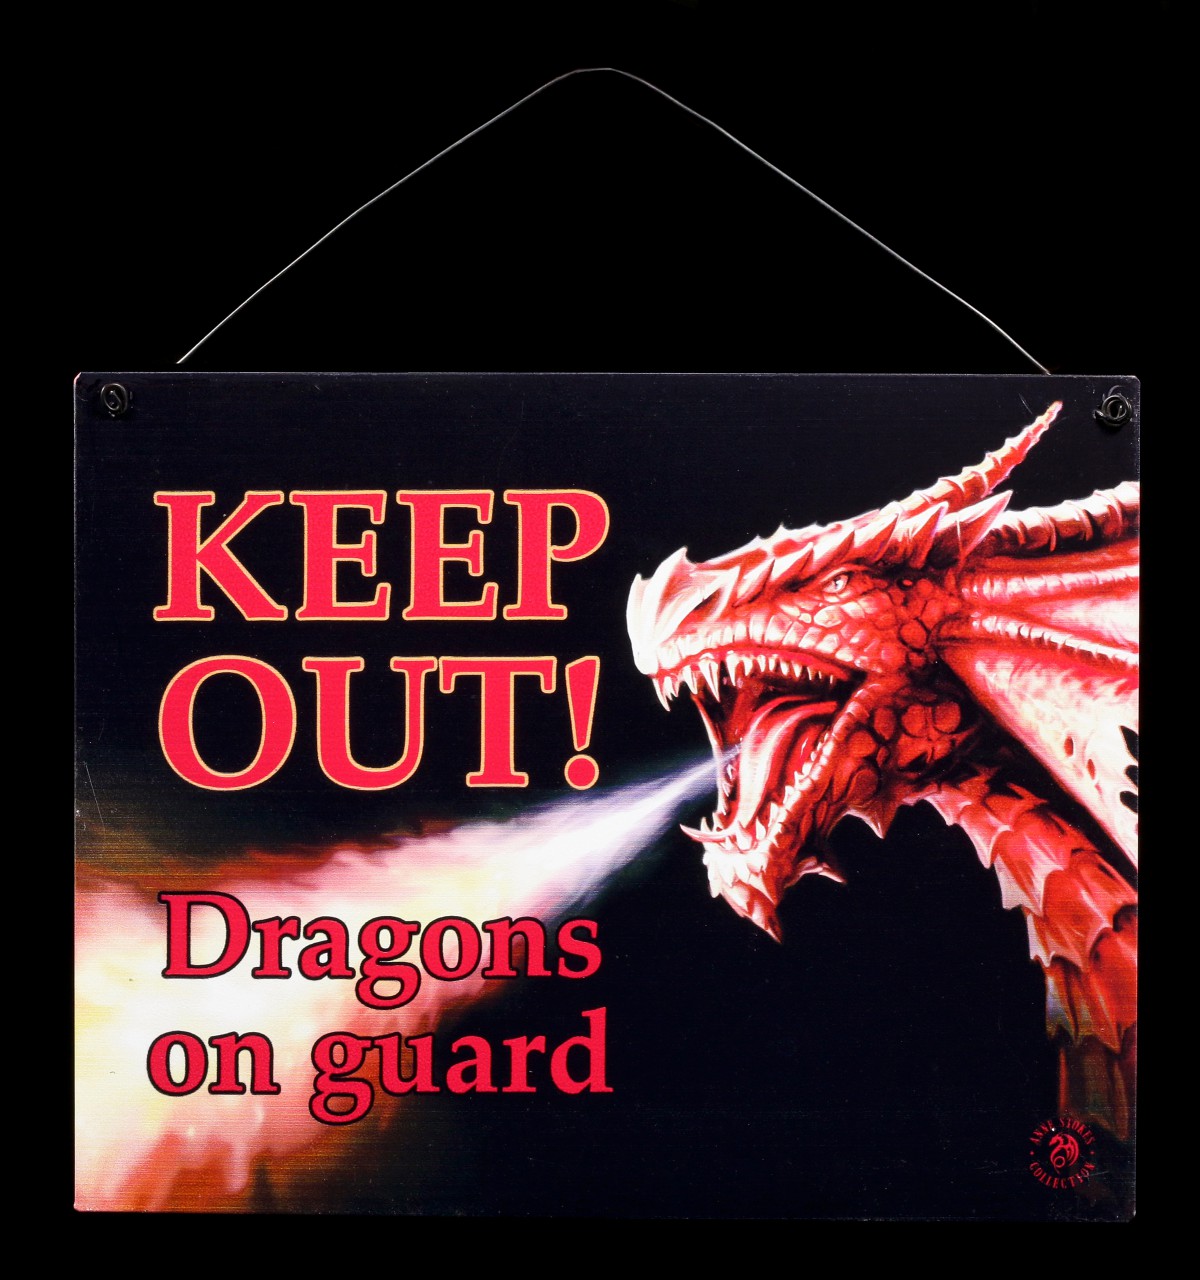 Metall Schild mit Drache - Keep Out - Dragons on guard